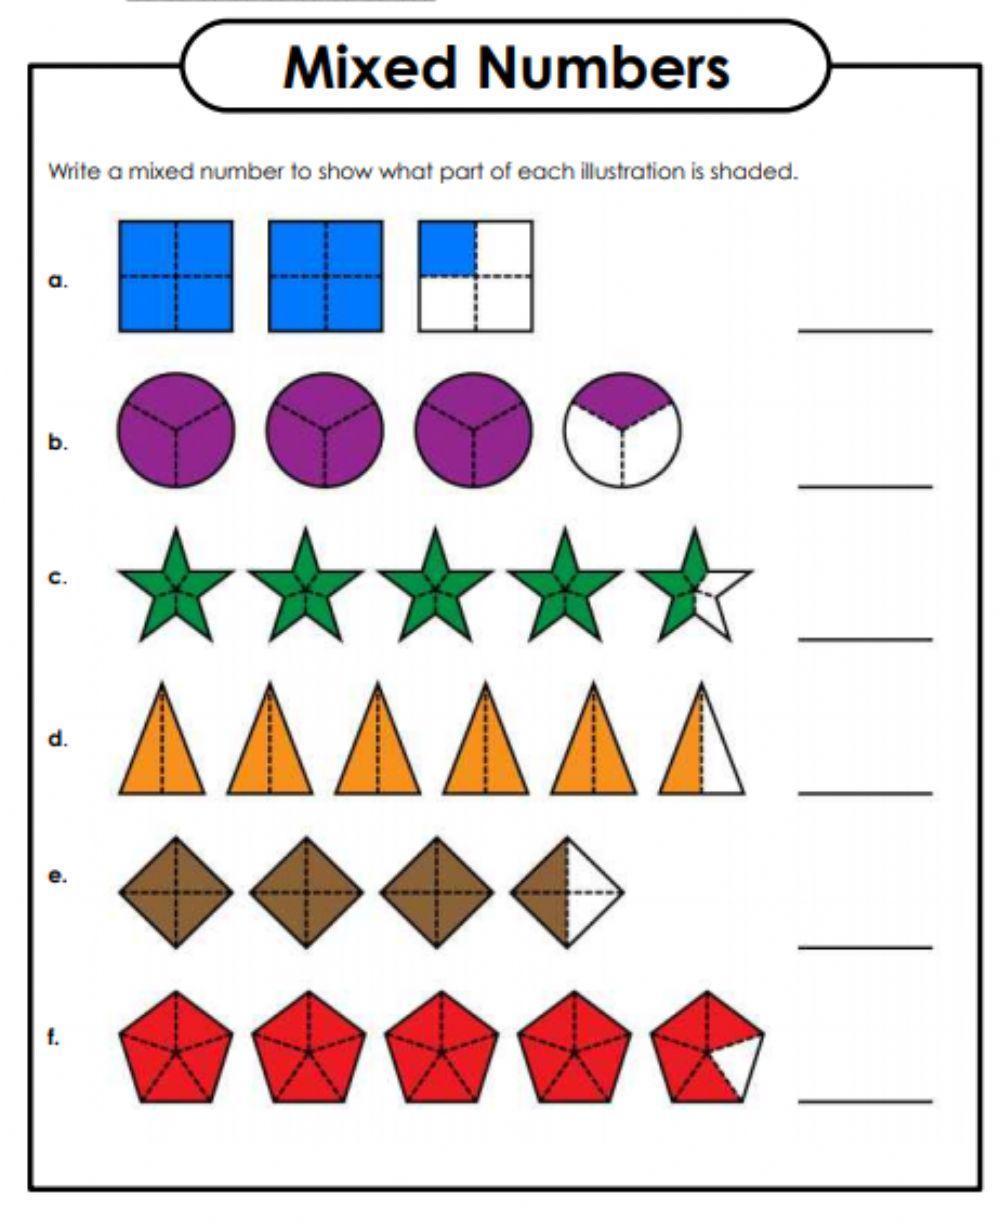 Mixed Numbers worksheet | Live Worksheets